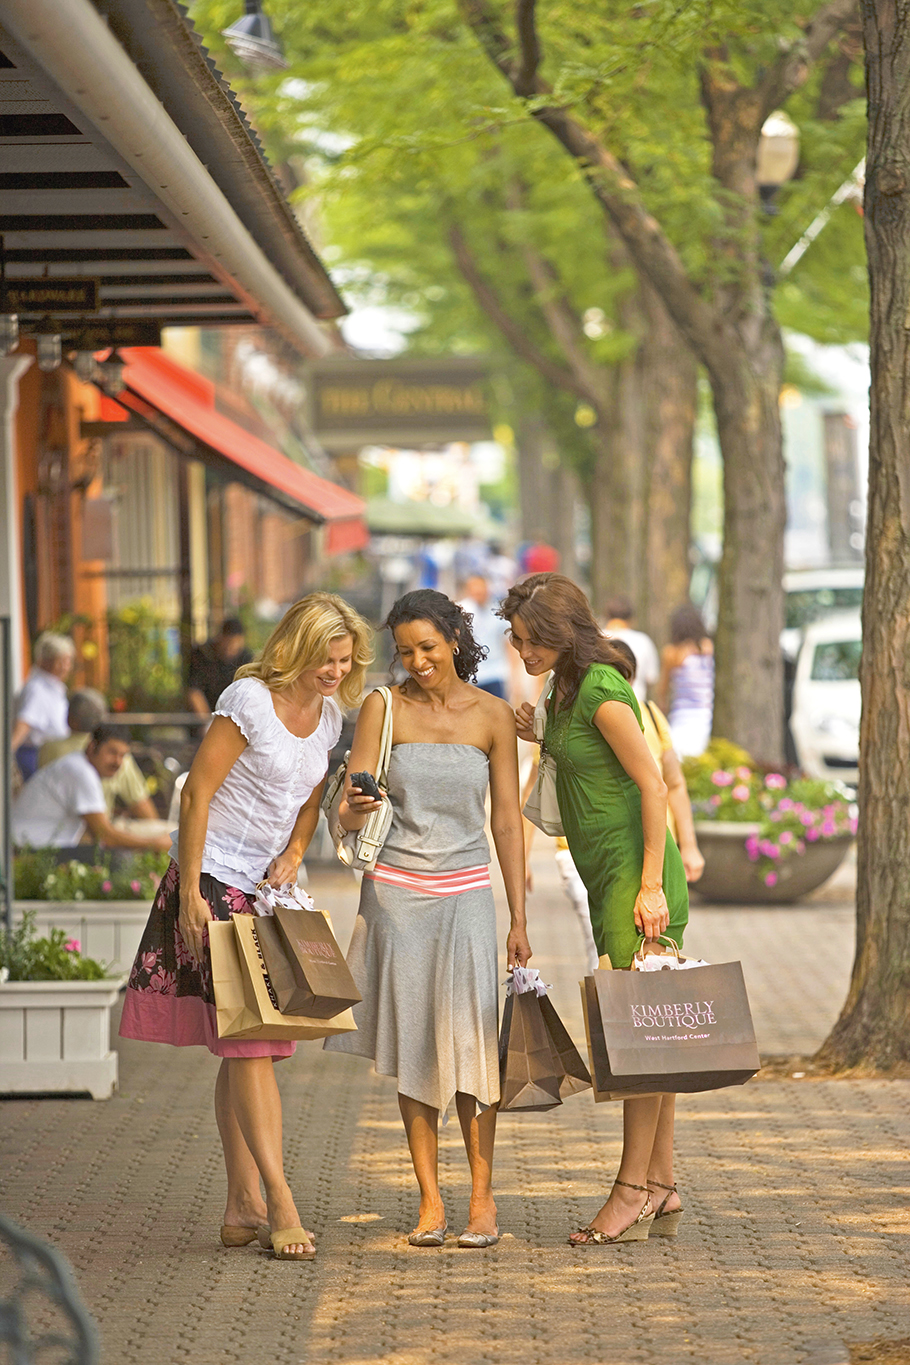 THE 5 BEST West Hartford Shopping Centers & Stores (Updated 2023)